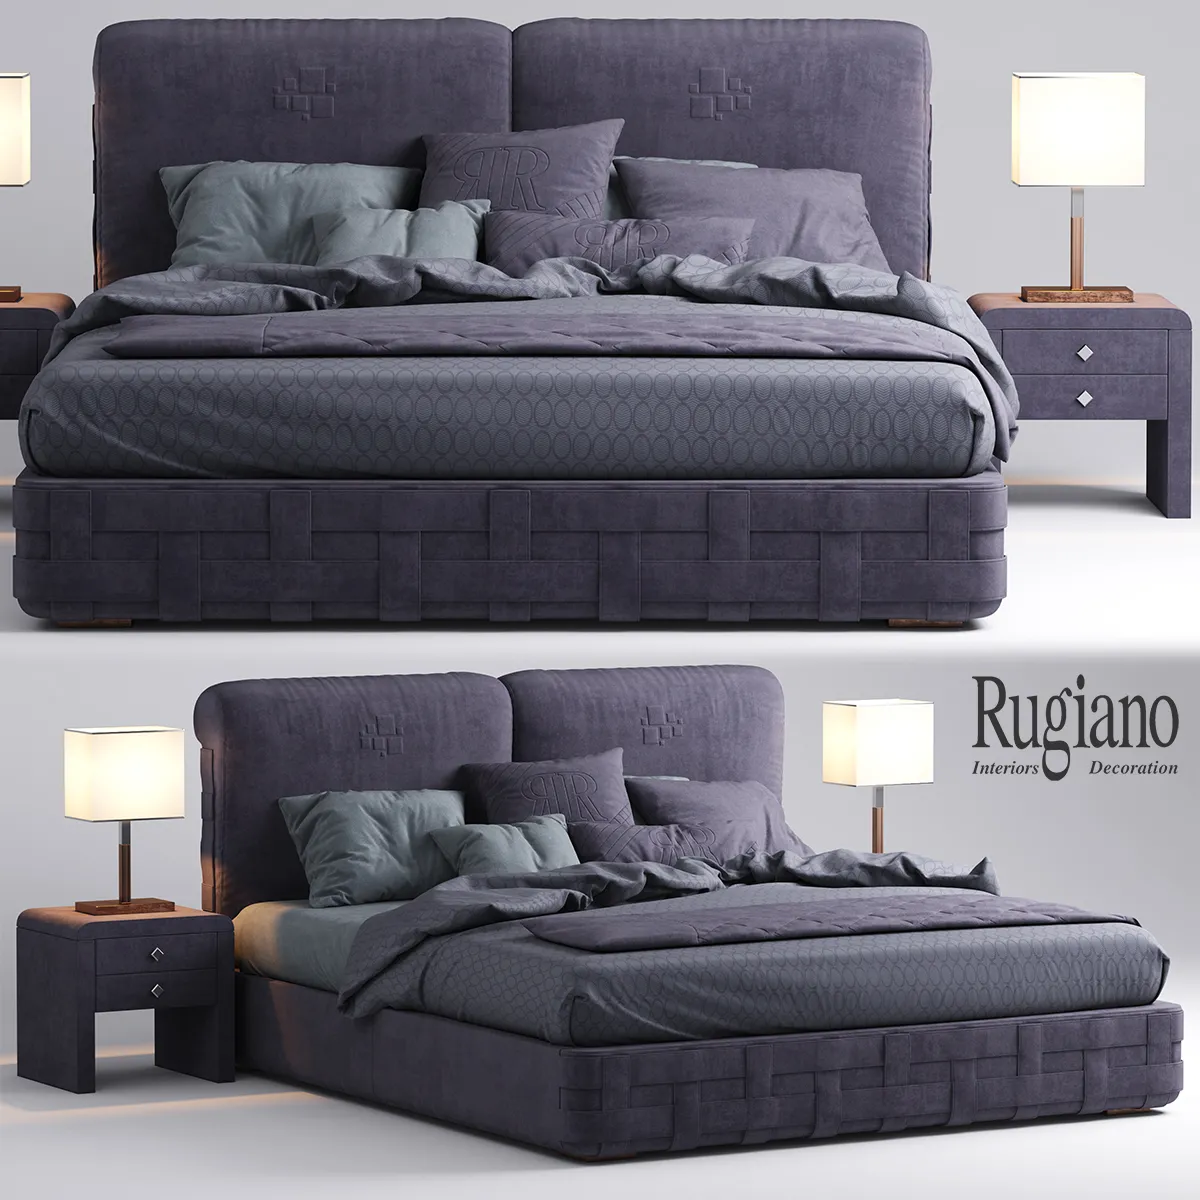 Bed rugiano braid bed – 207763